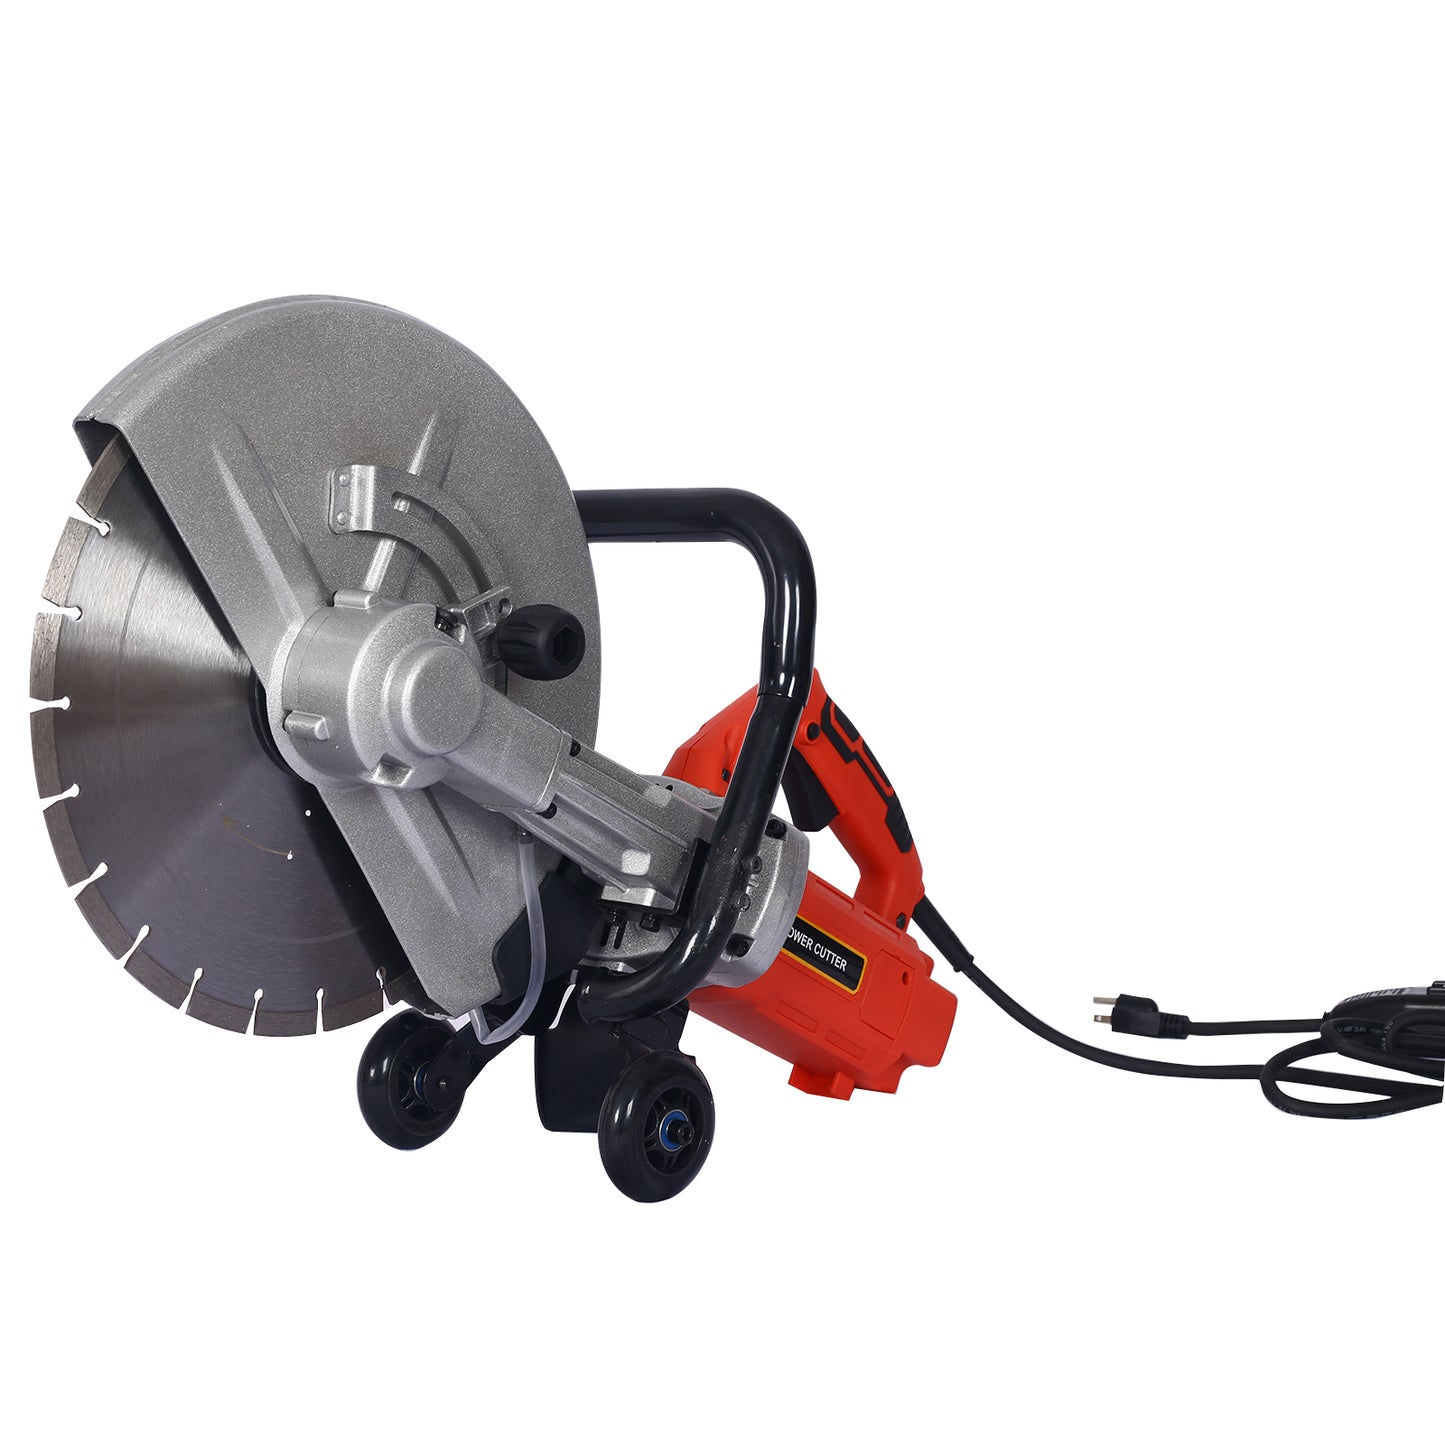 Electric 14" Cut Off Saw Wet/Dry Concrete Saw Cutter Guide Roller with Water Line Attachment 3000w with blade